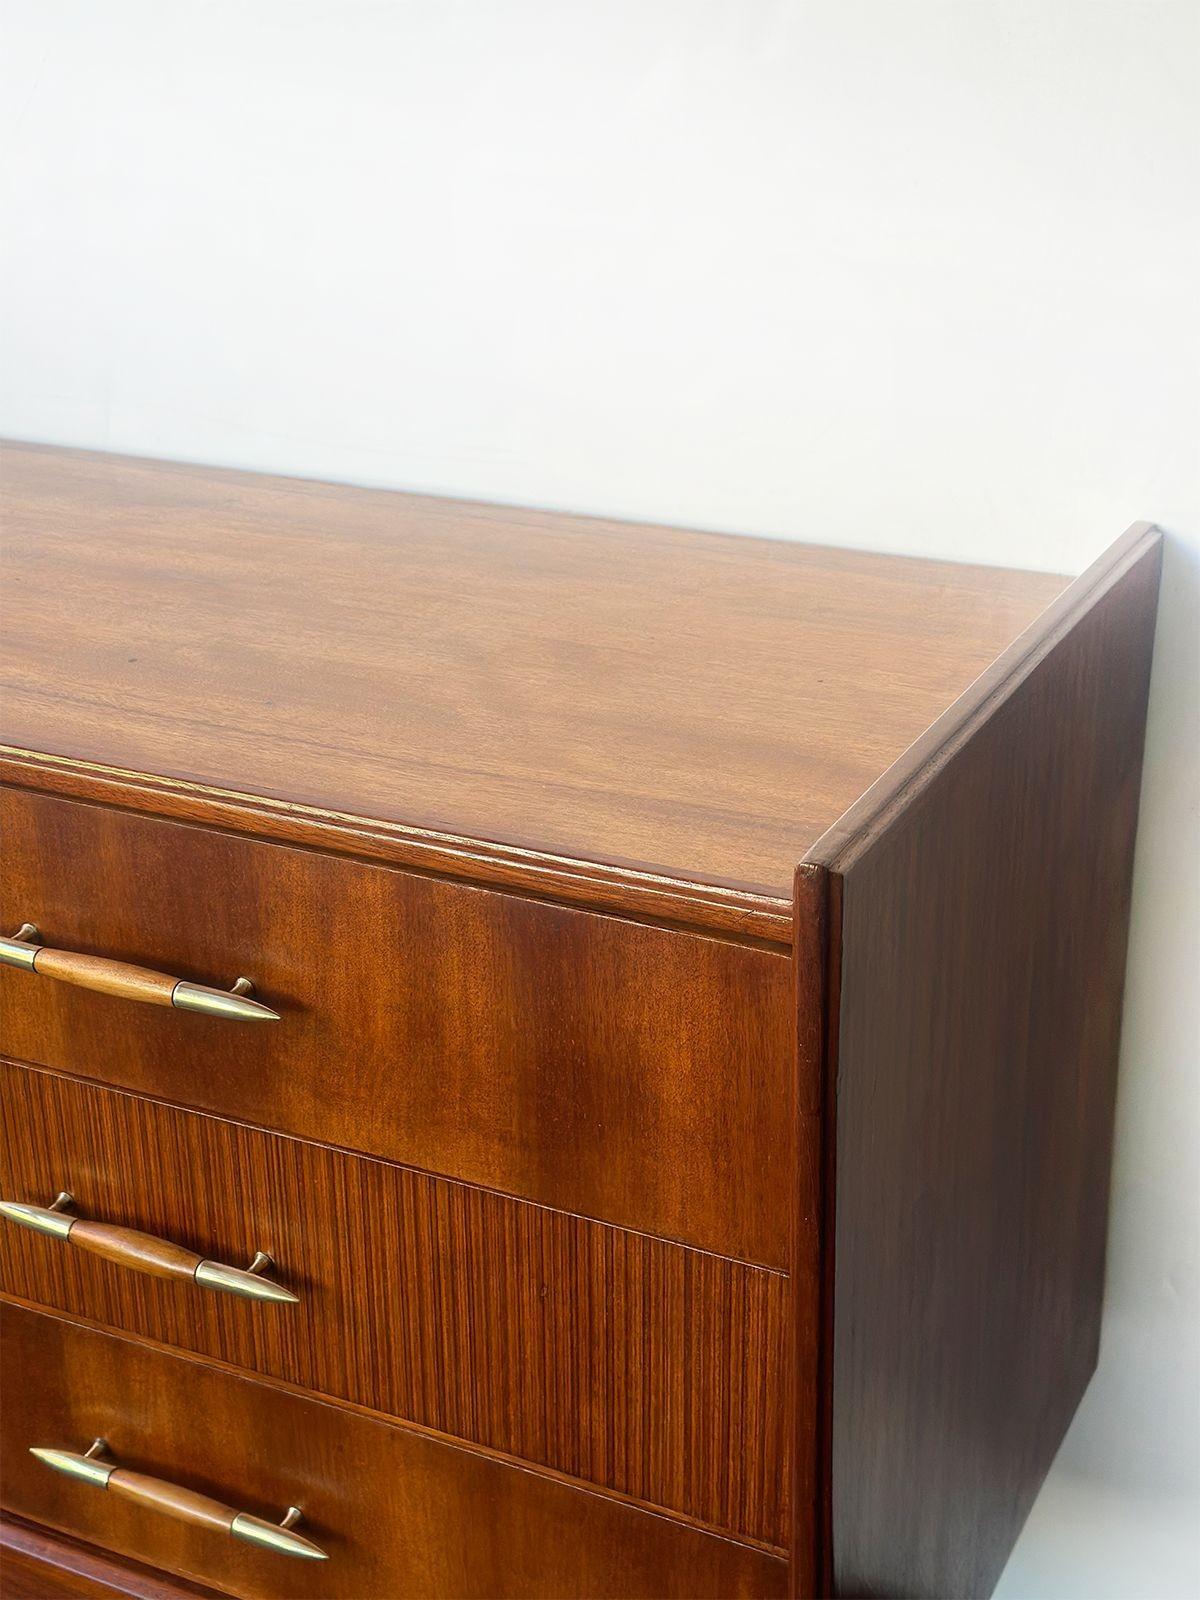 Vintage mid-century dresser made in Italy in the 1950s; made with rich wood and fine brass details which are integrated into the drawer handles and gracefully tapered legs.
The dresser offers ample storage space with its six spacious drawers. What